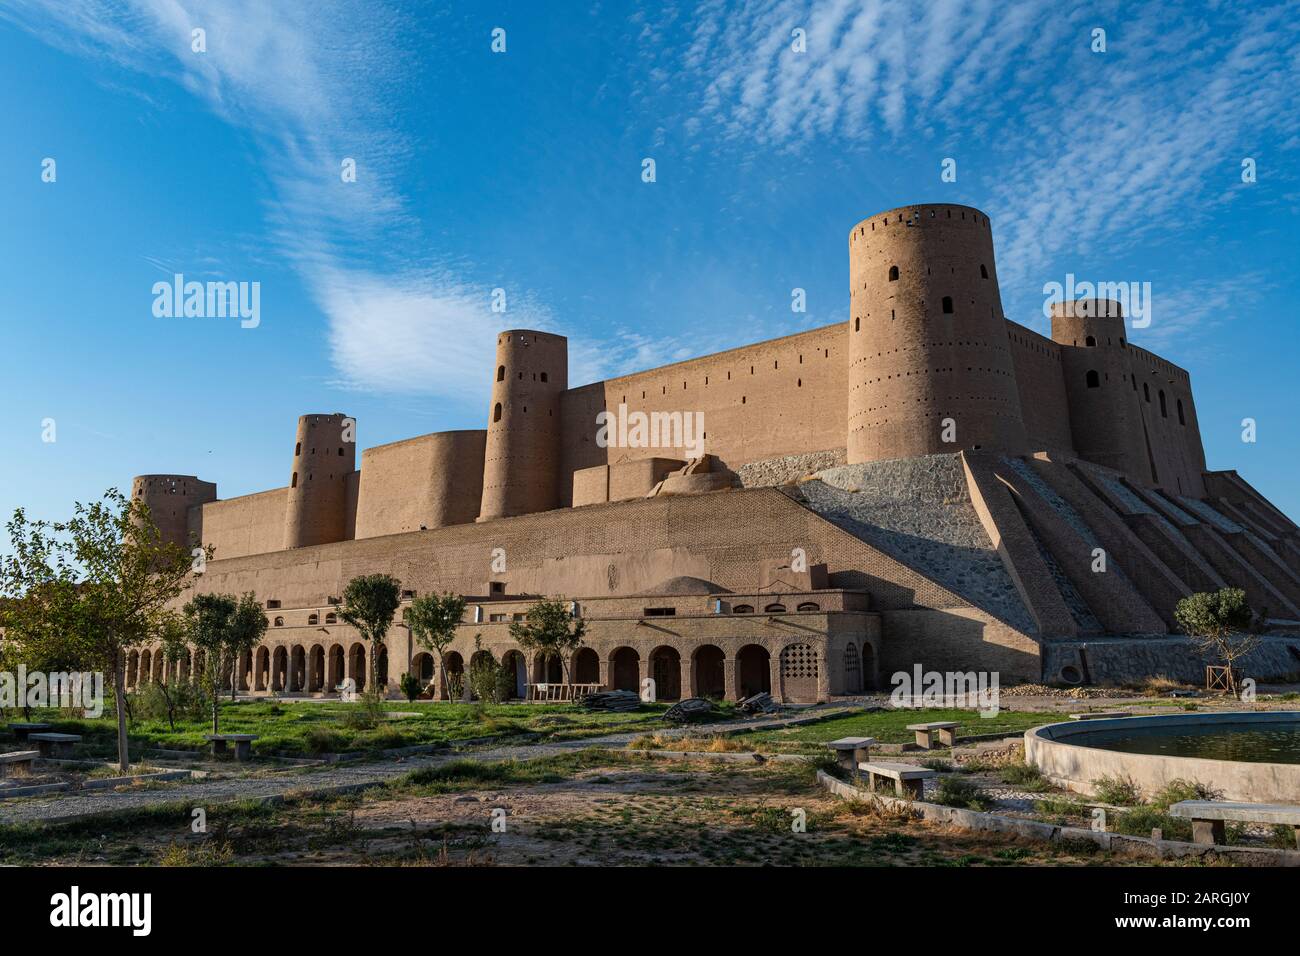 The citadel of Herat, Afghanistan, Asia Stock Photo